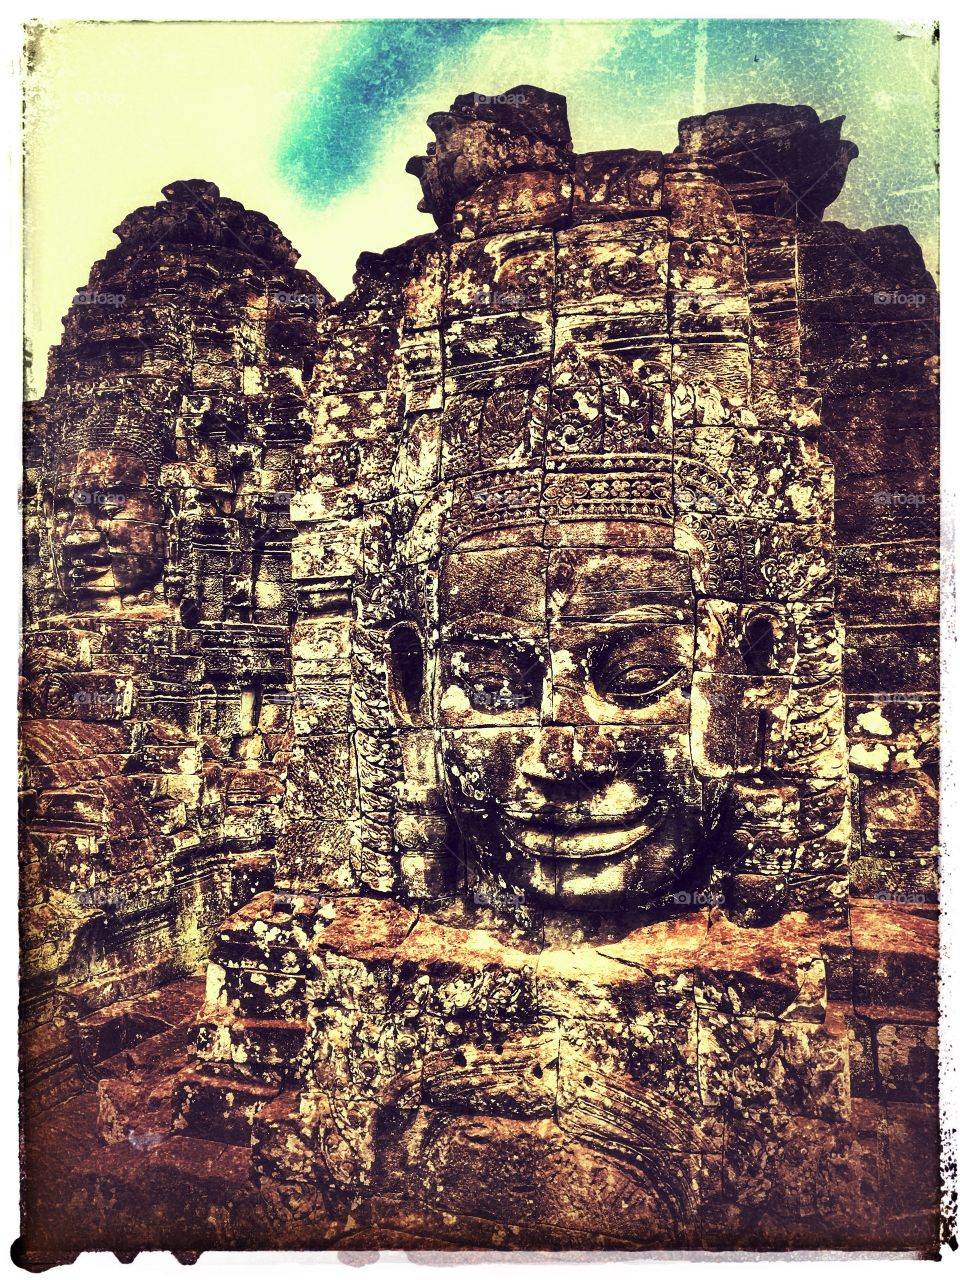 Angkor mystic view - faces of the temples near Siem Reap